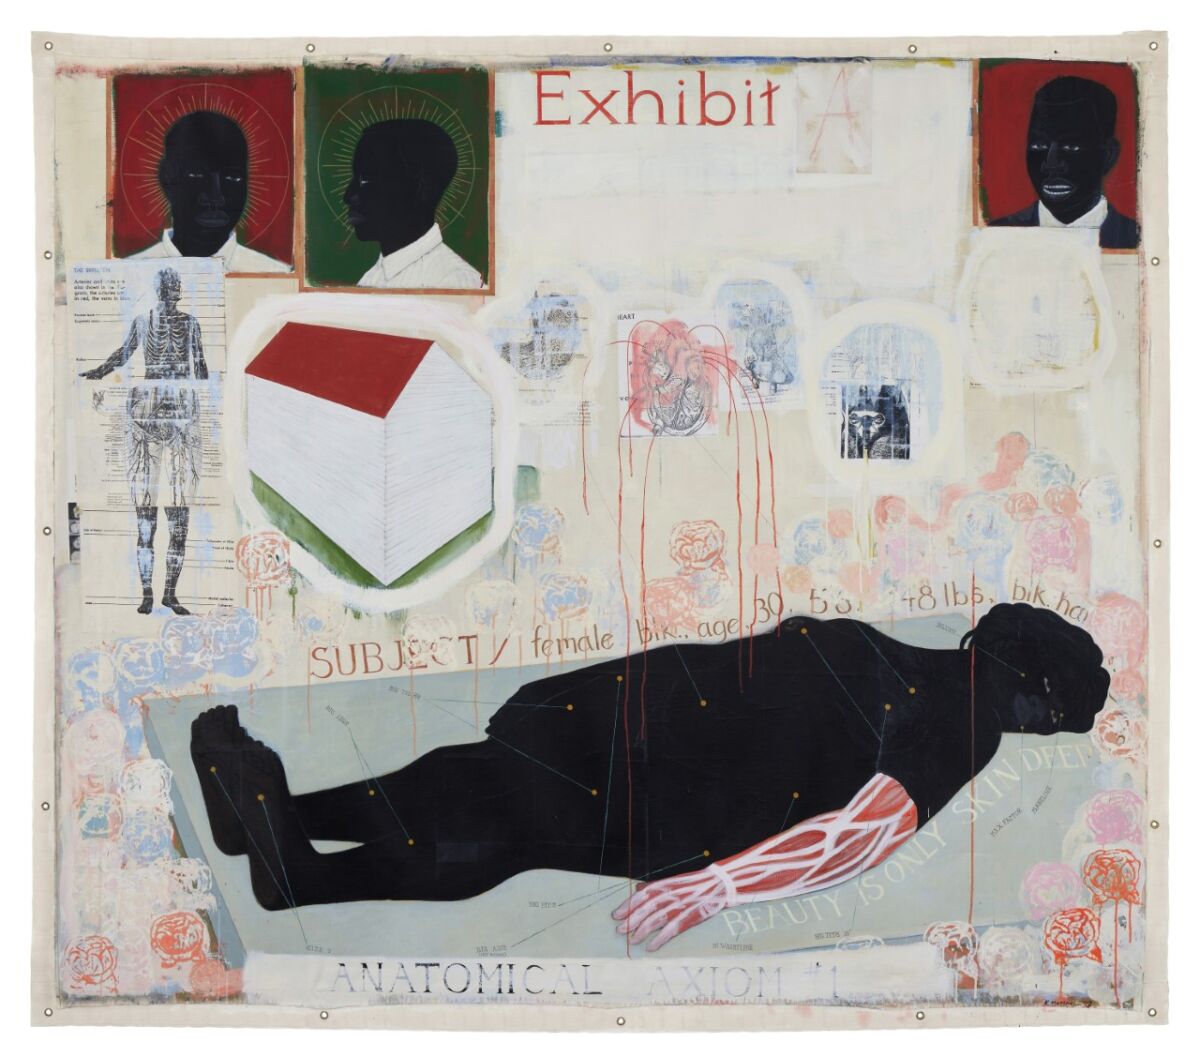 A painting with a body prostrate on the floor with sketchings above it 